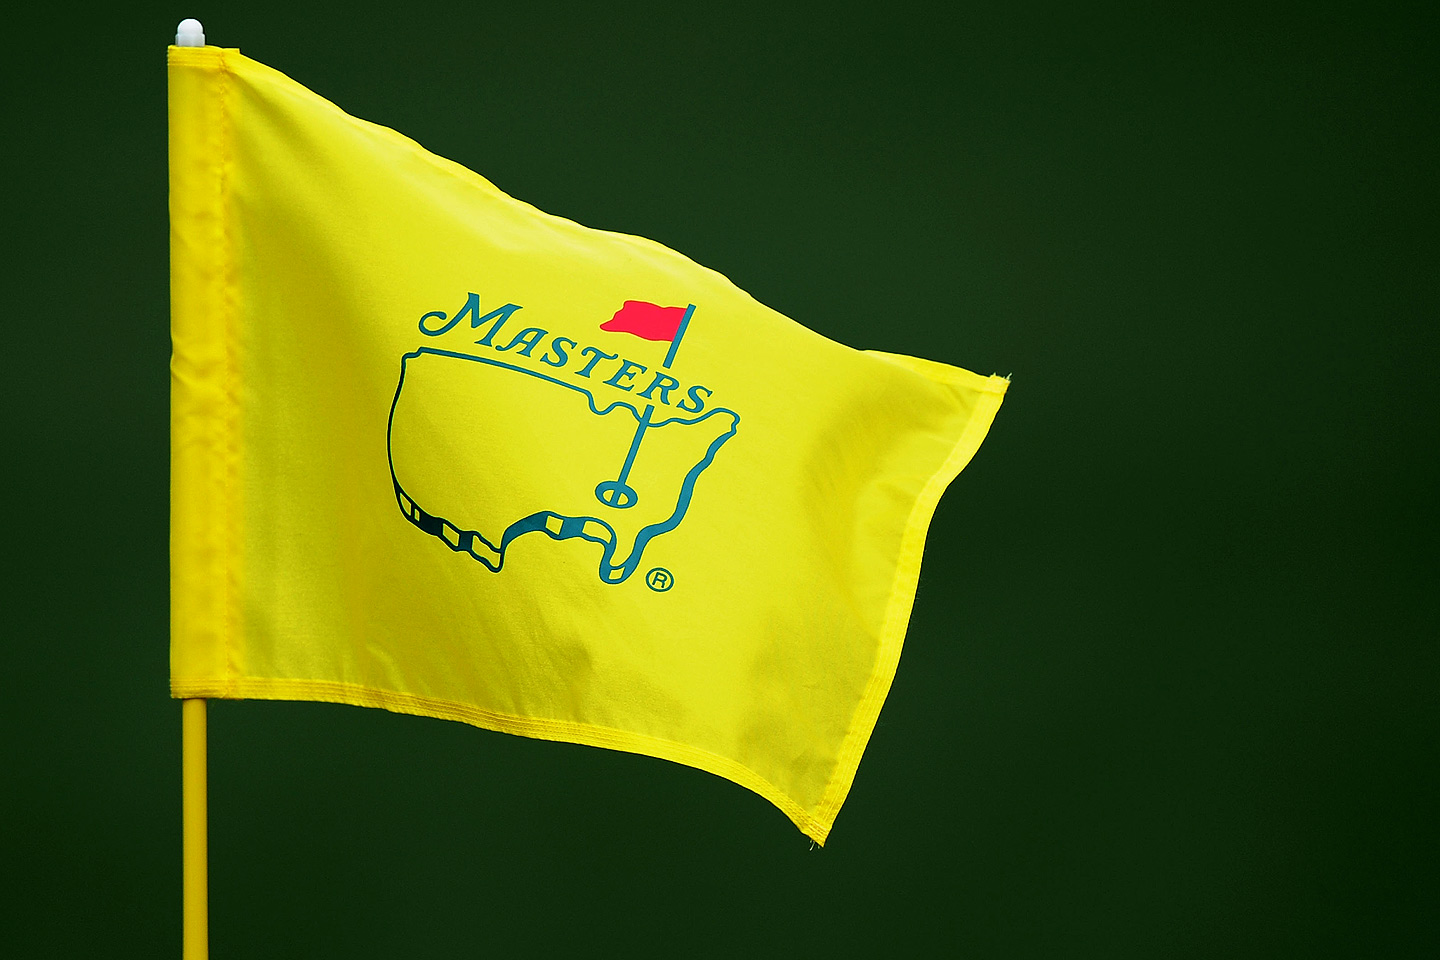 Yellow flag with text, "masters," and red flag around United States outline.